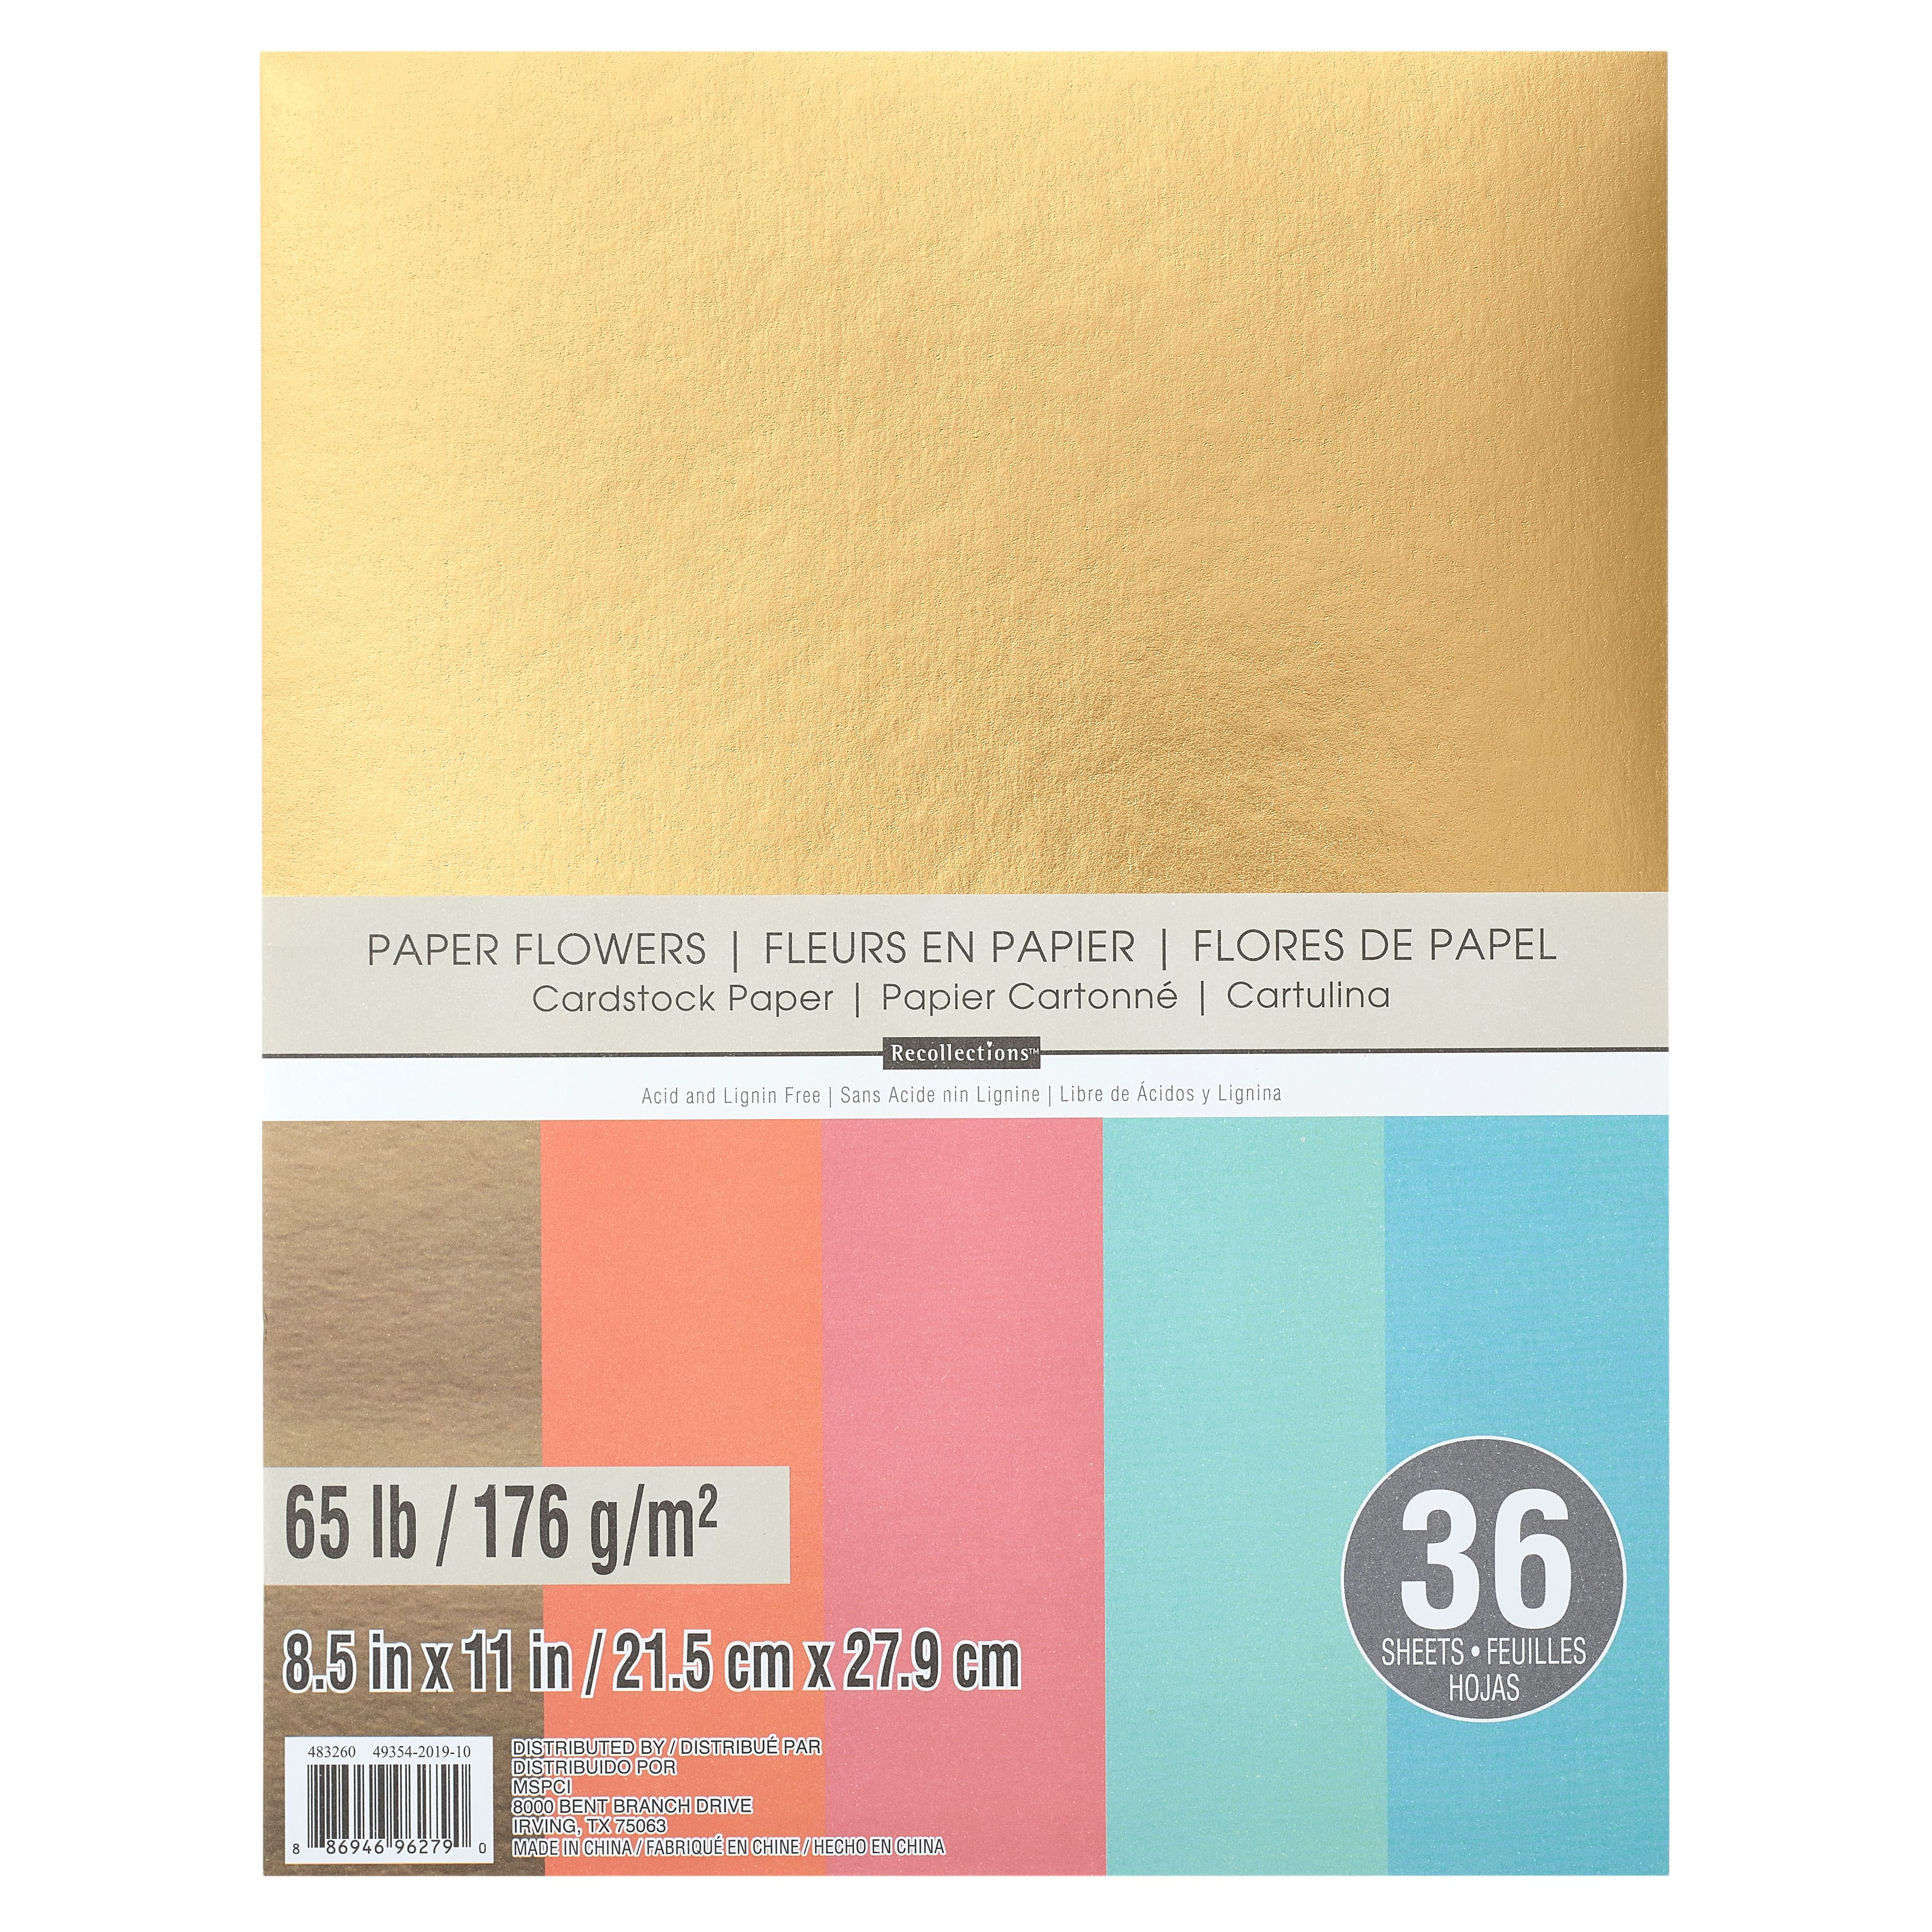 Glitter Metallic Cardstock Paper by Recollections™, 8.5 x 11